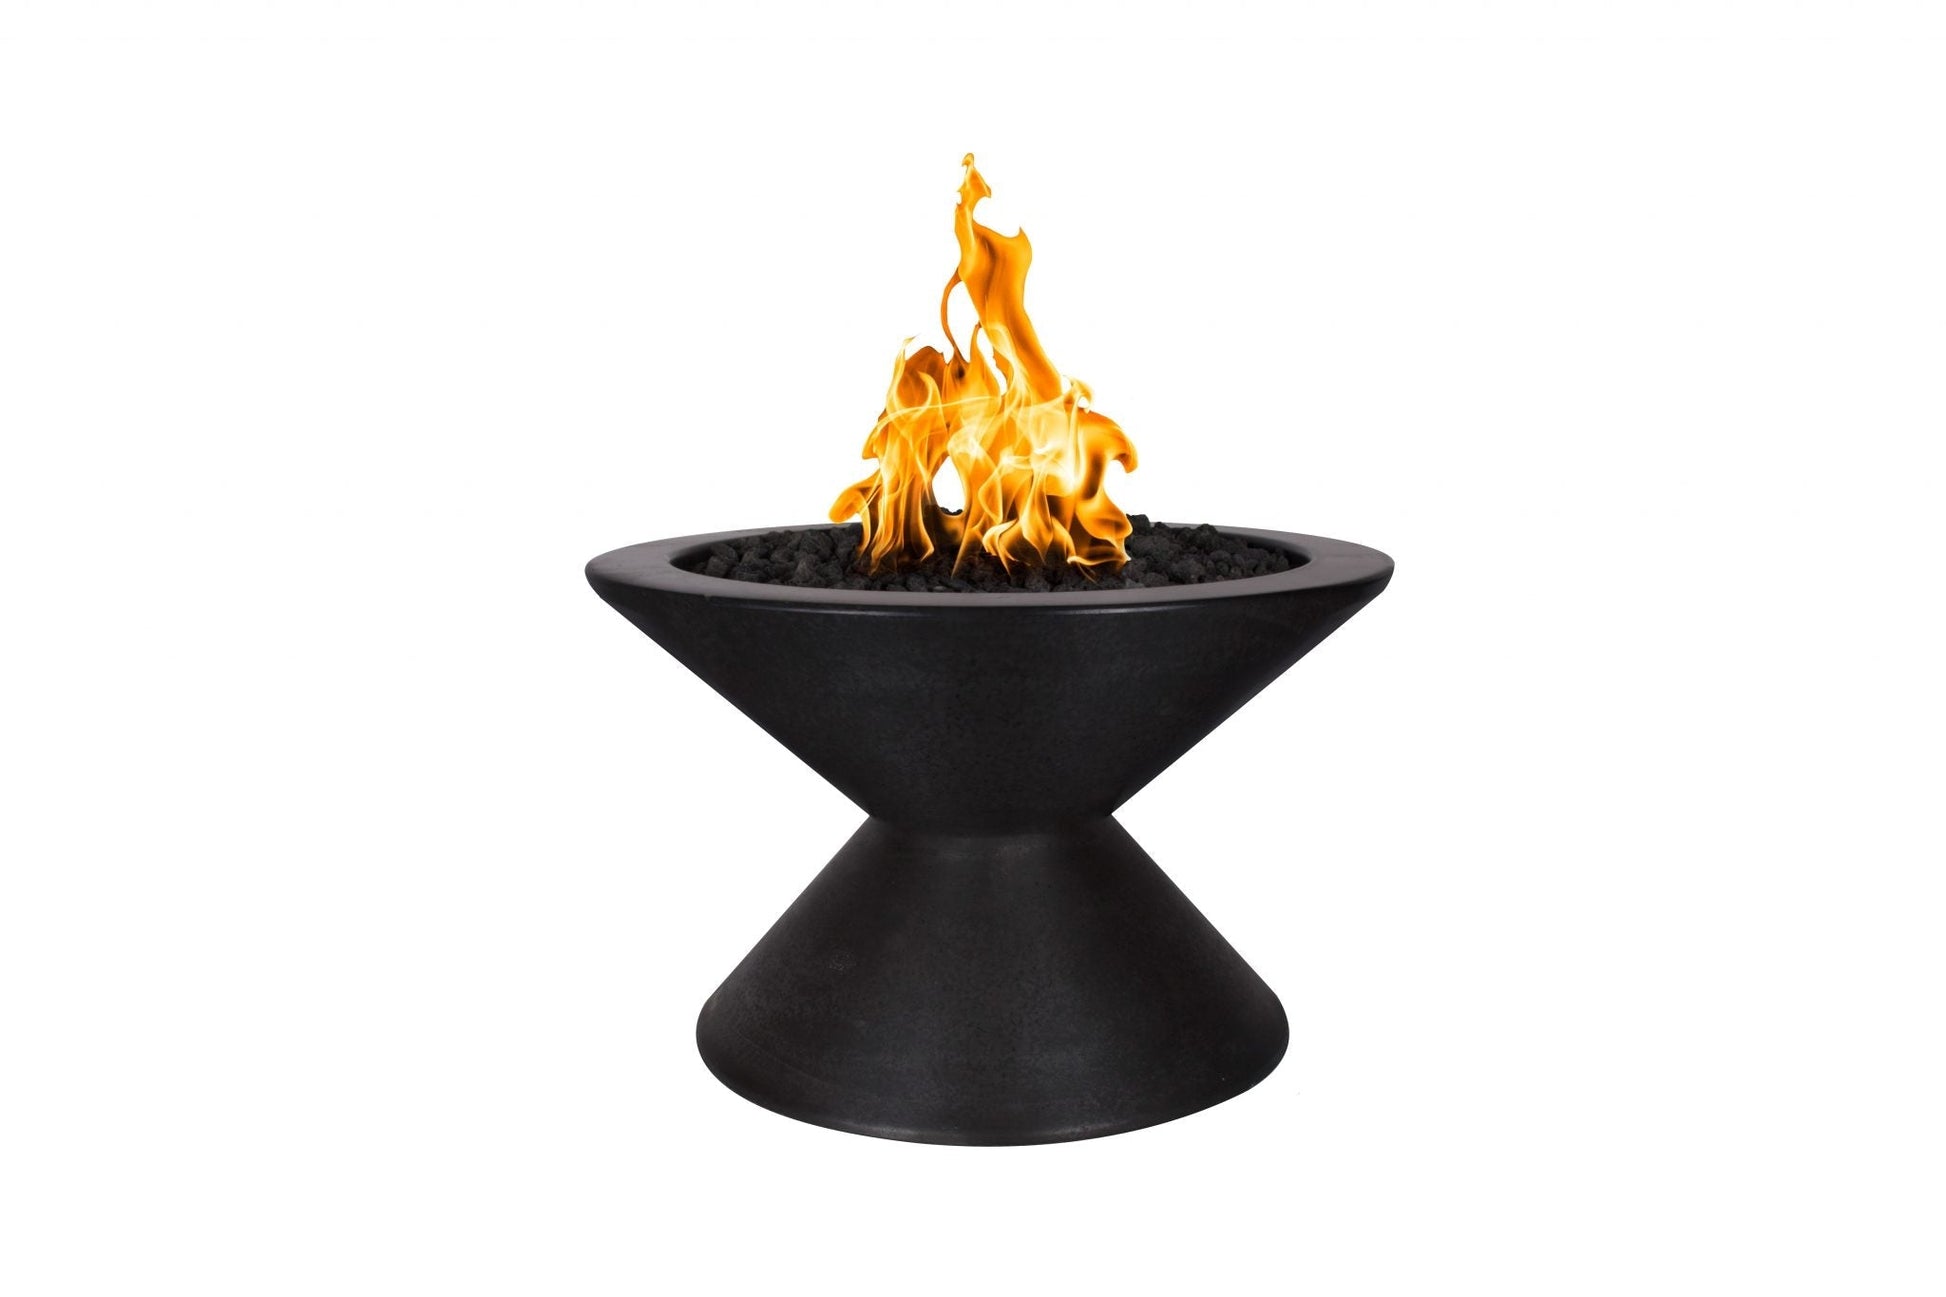 The Outdoor Plus Round Lucia 31" Metallic Silver GFRC Concrete Liquid Propane Fire Pit with 12V Electronic Ignition